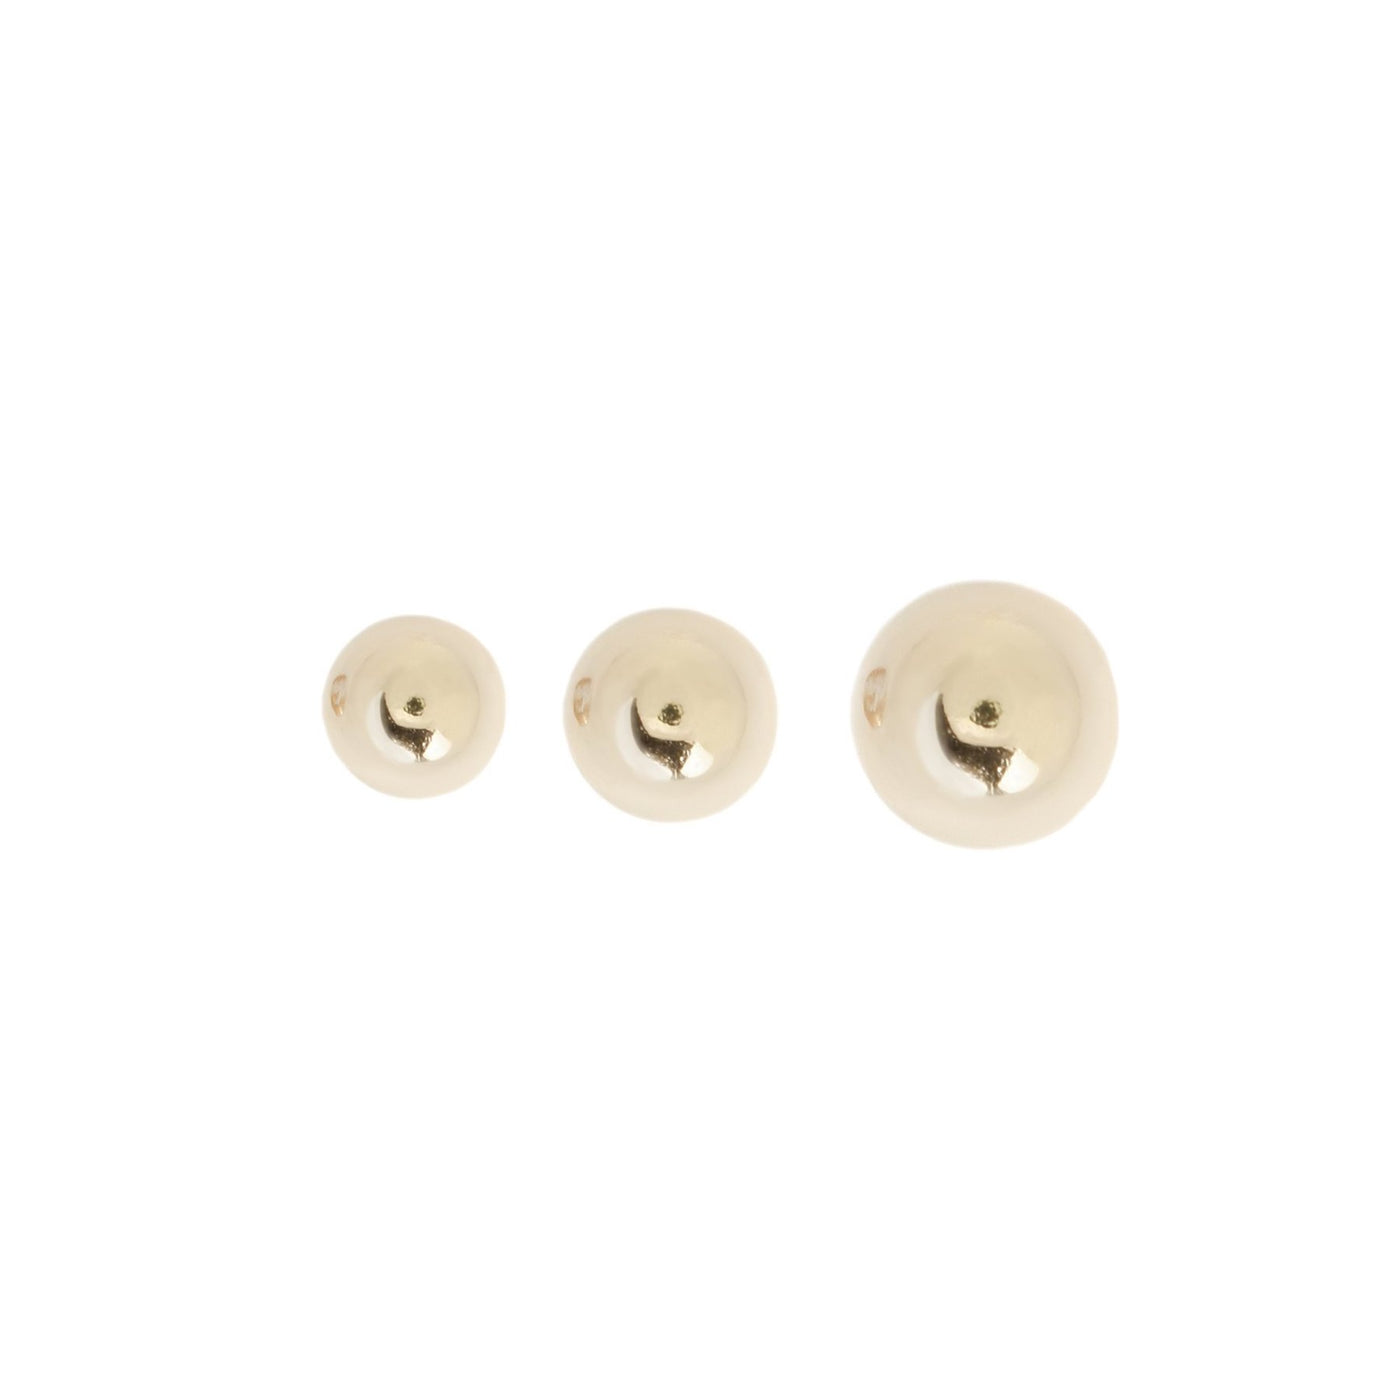 threadless: Bead End in Gold